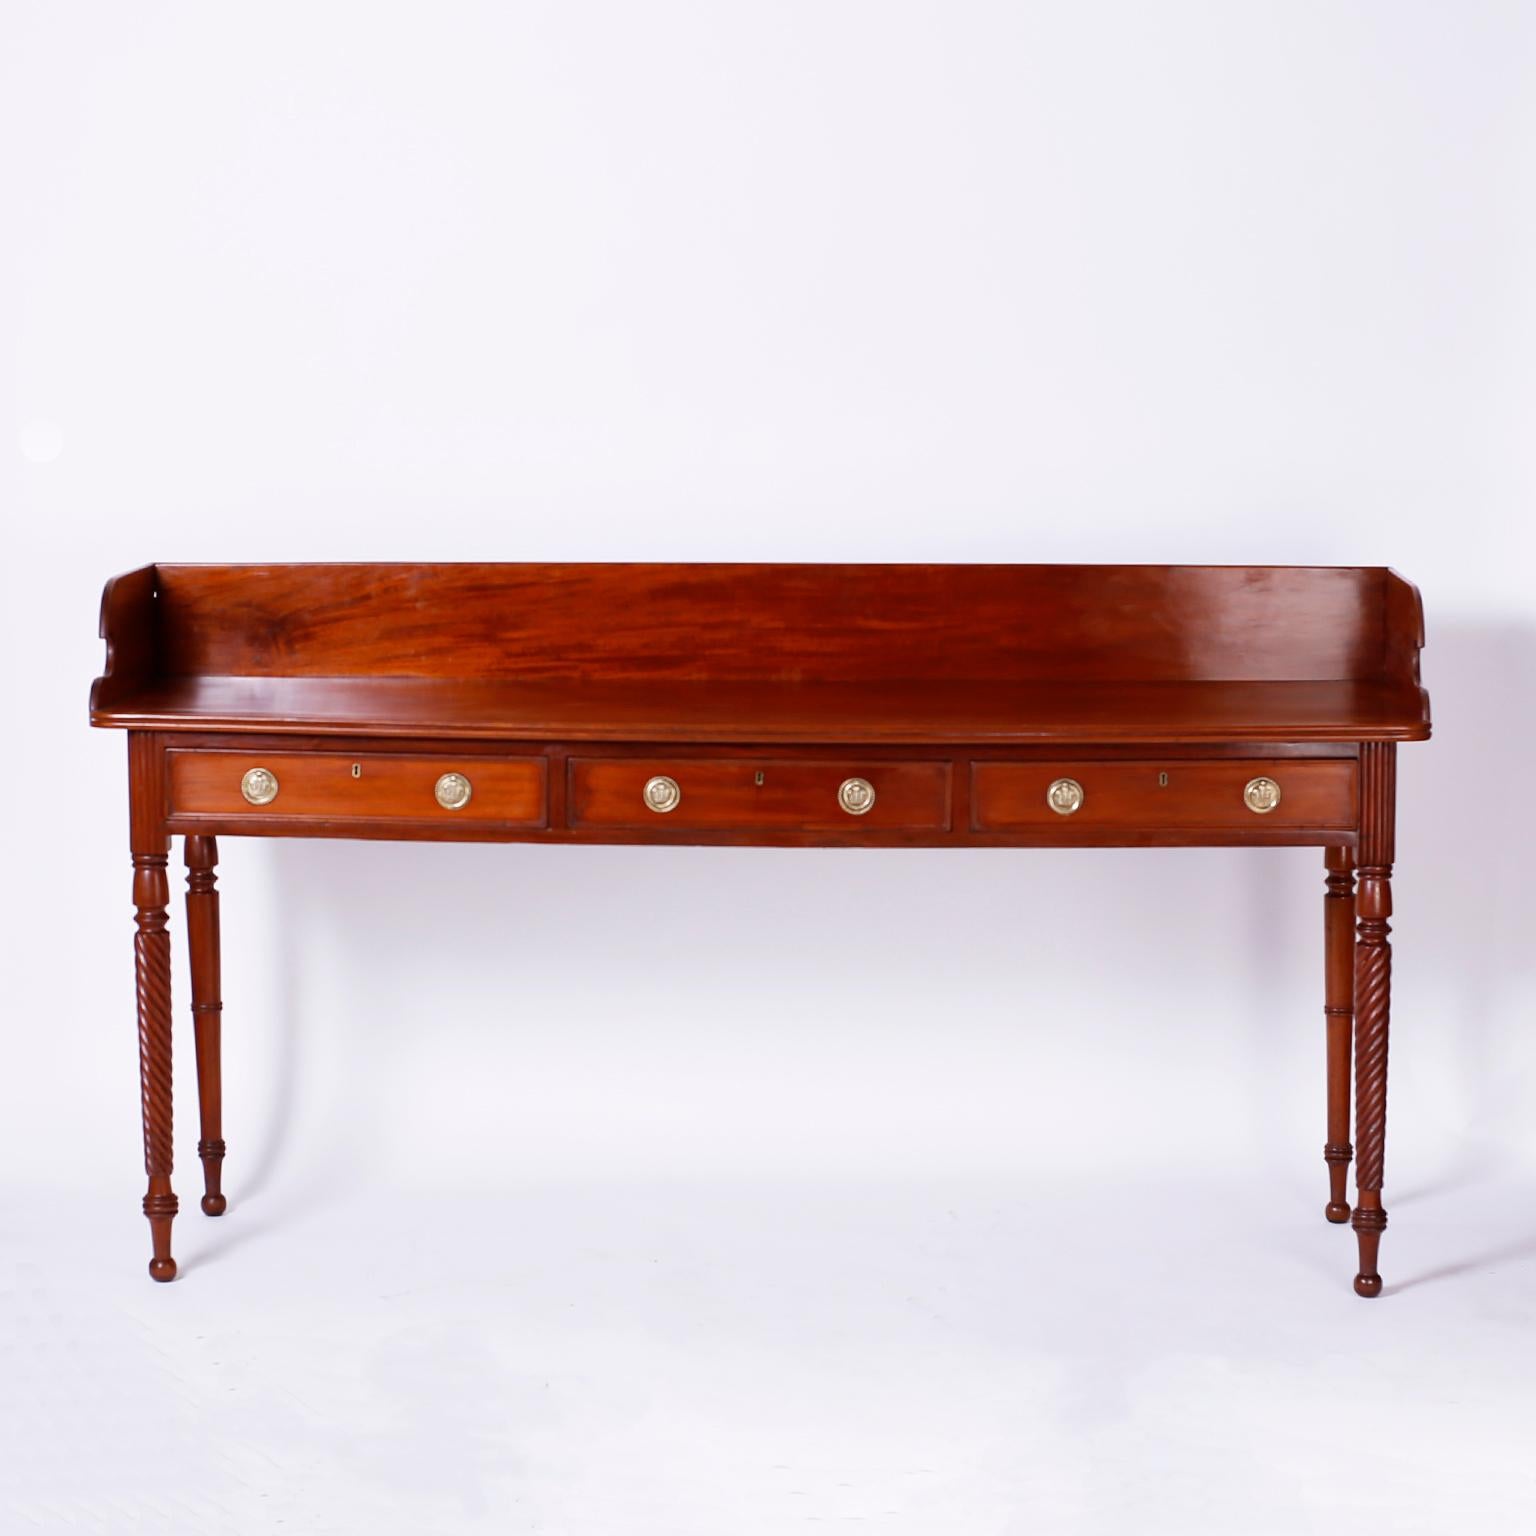 19th century British colonial server with a long lean form featuring handmade construction, a gallery on the top, single plank serving surface, three storage drawers, and elegant turned and rope twisted legs.